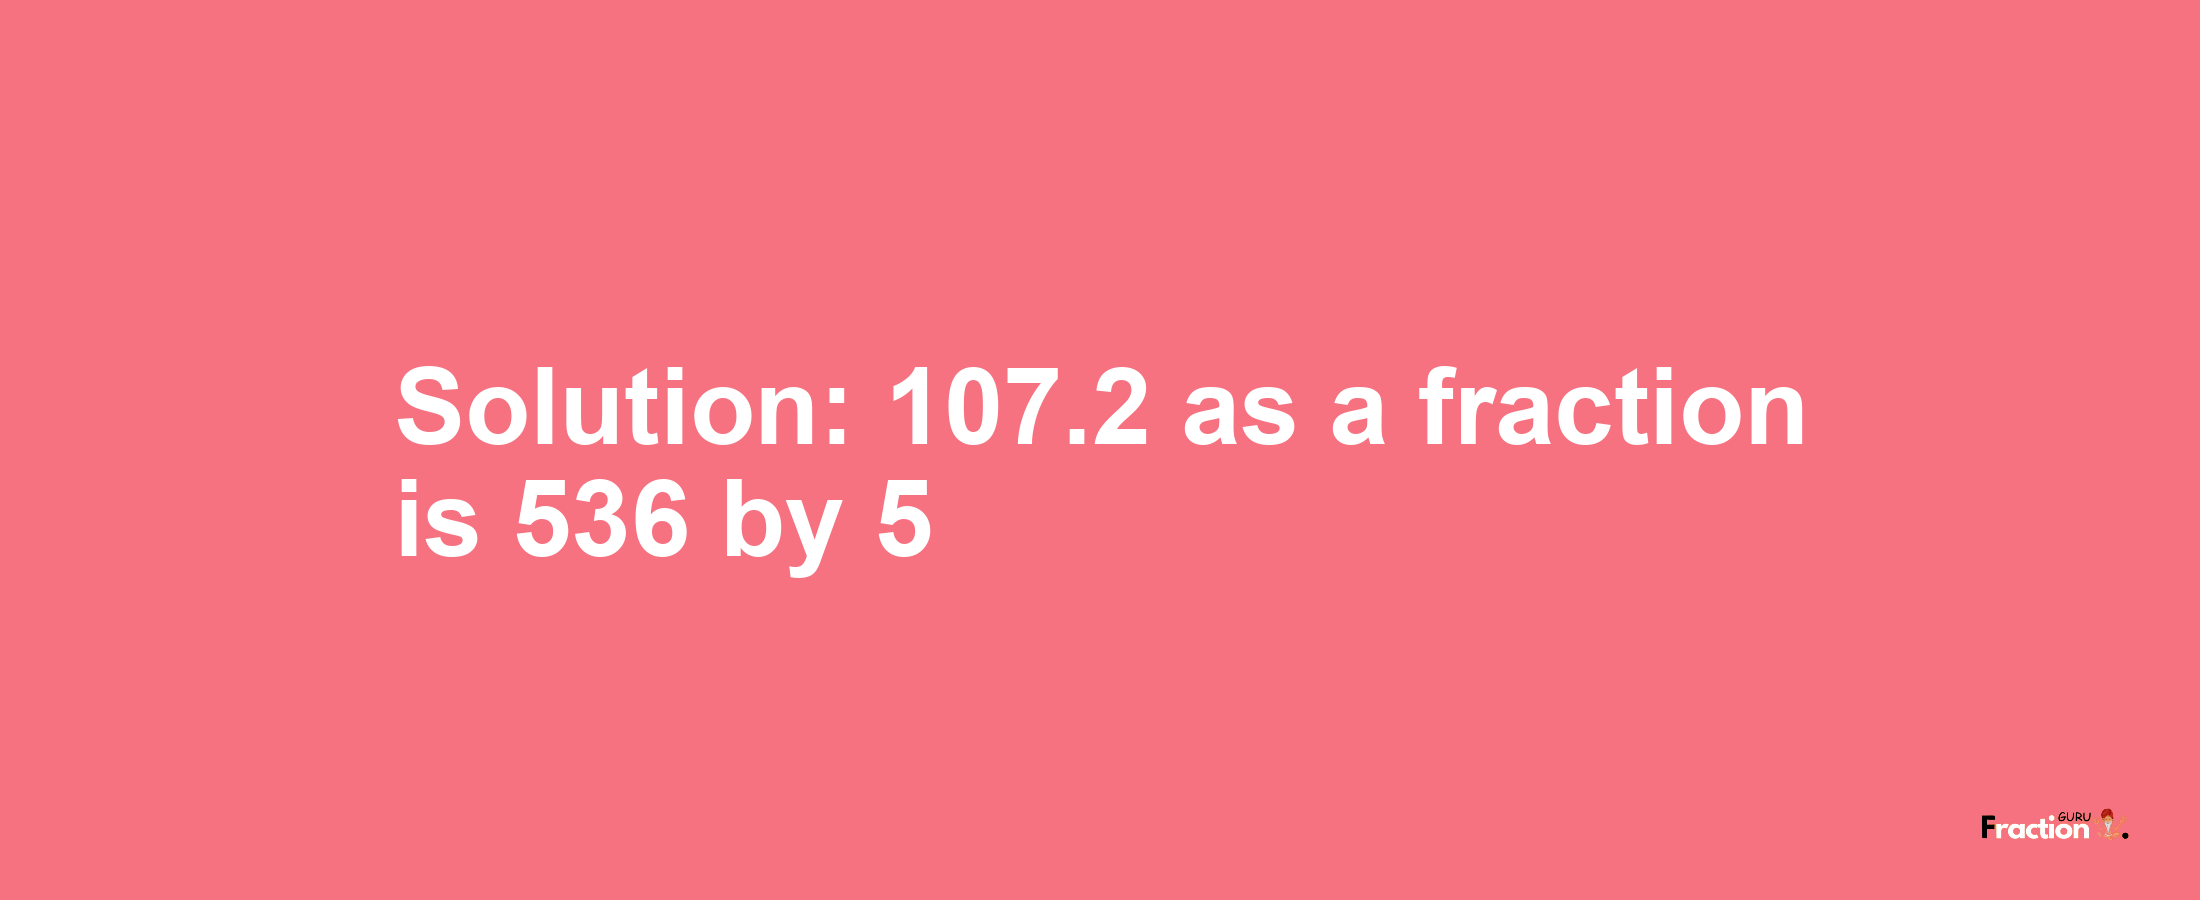 Solution:107.2 as a fraction is 536/5